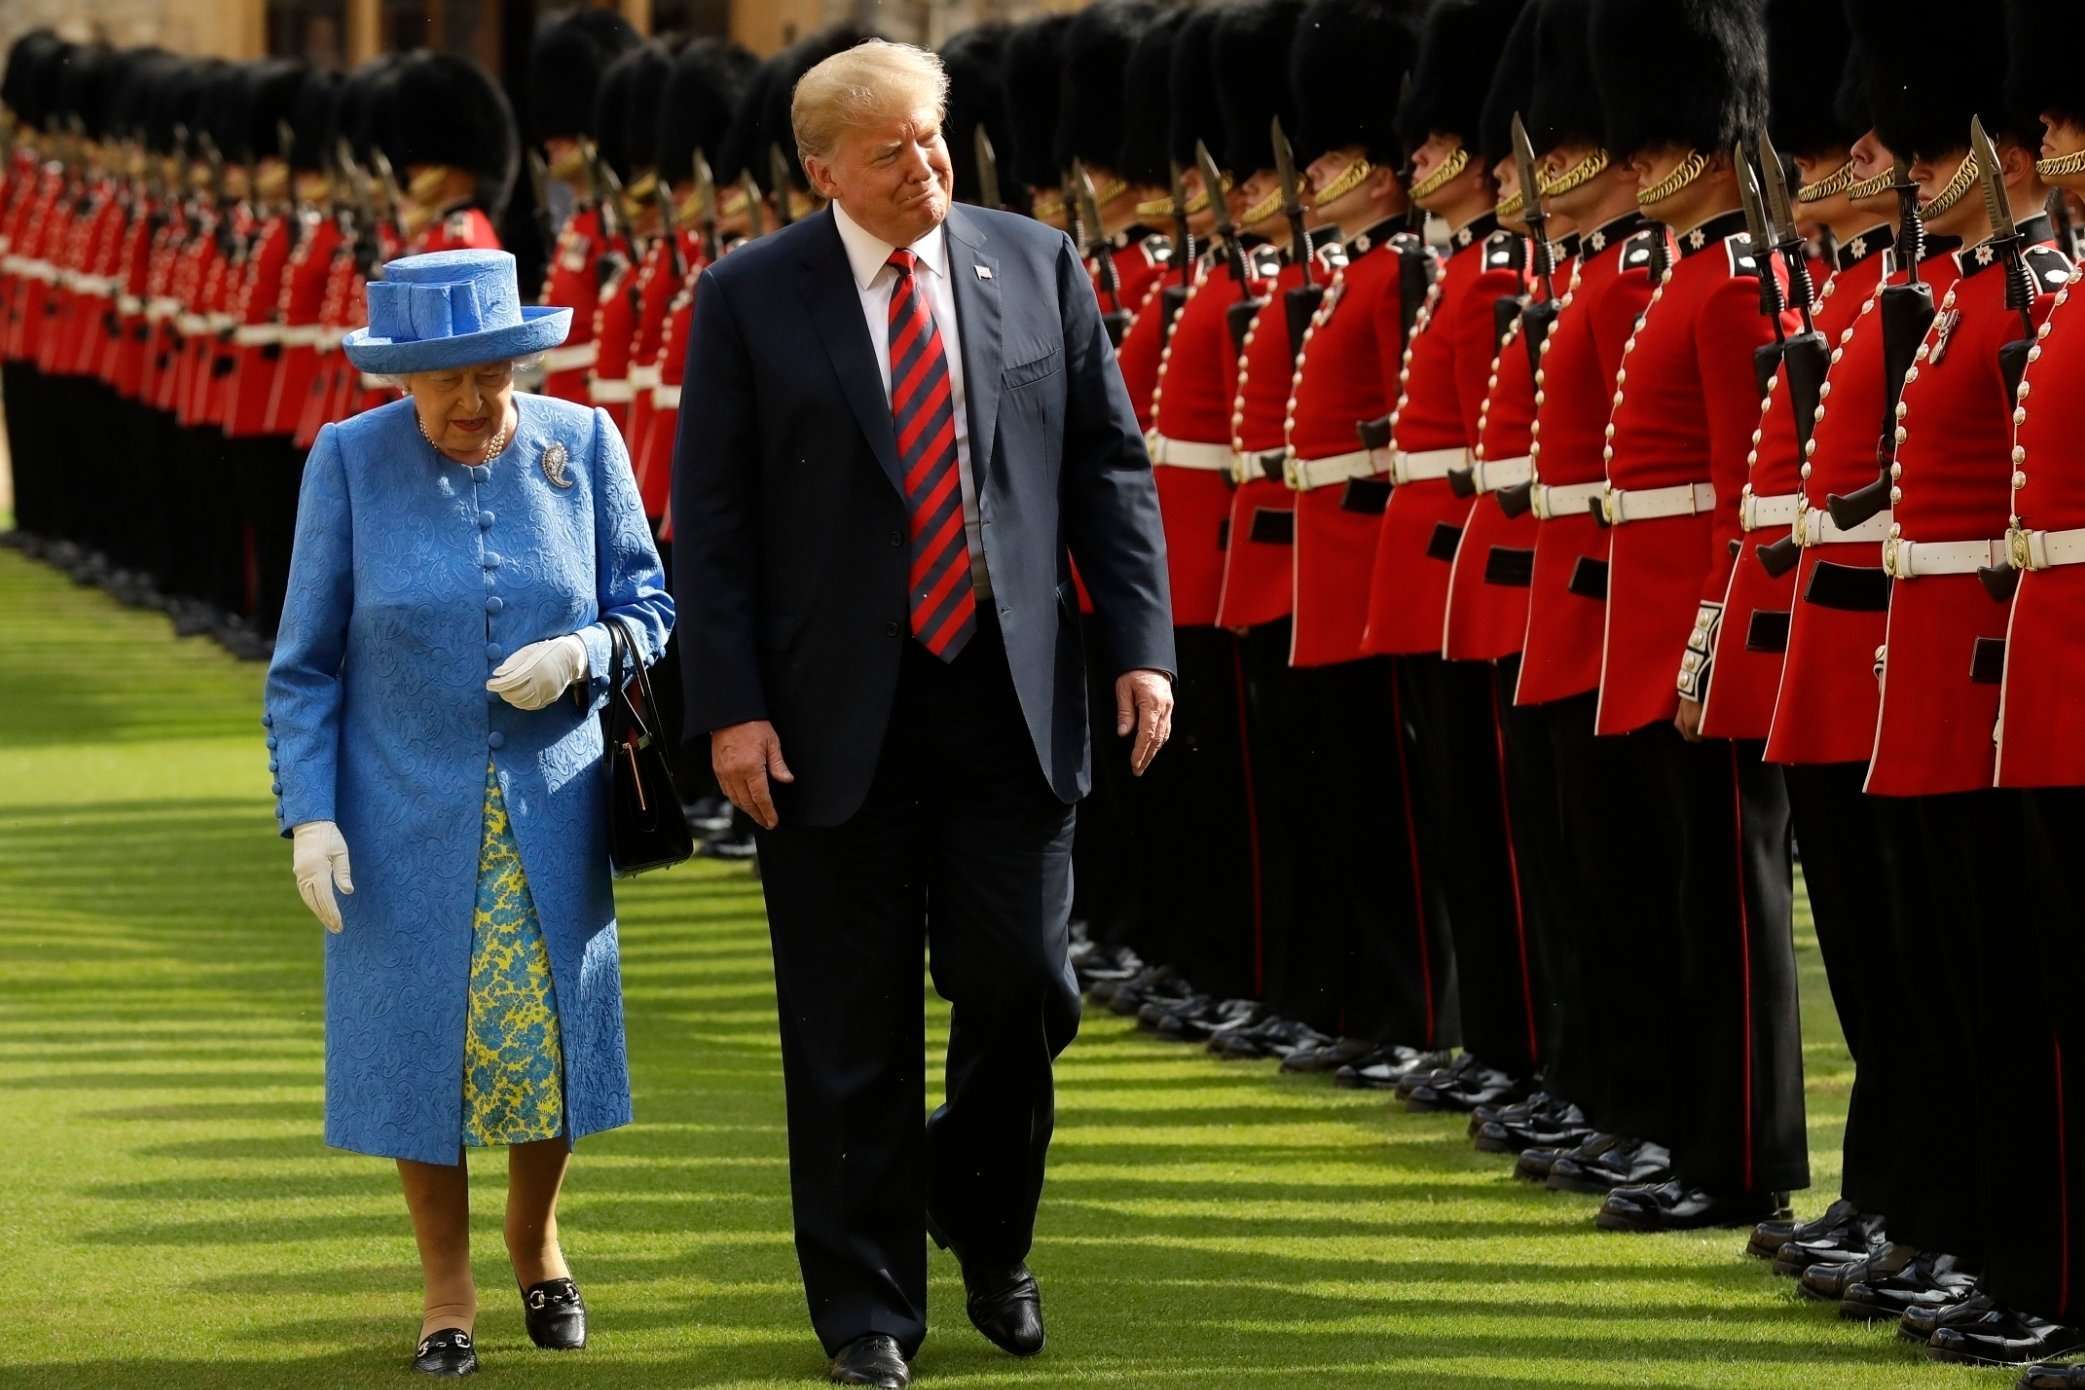 image for Trump falsely claims Queen inspected Guard of Honour for first time in 70 years because of his visit